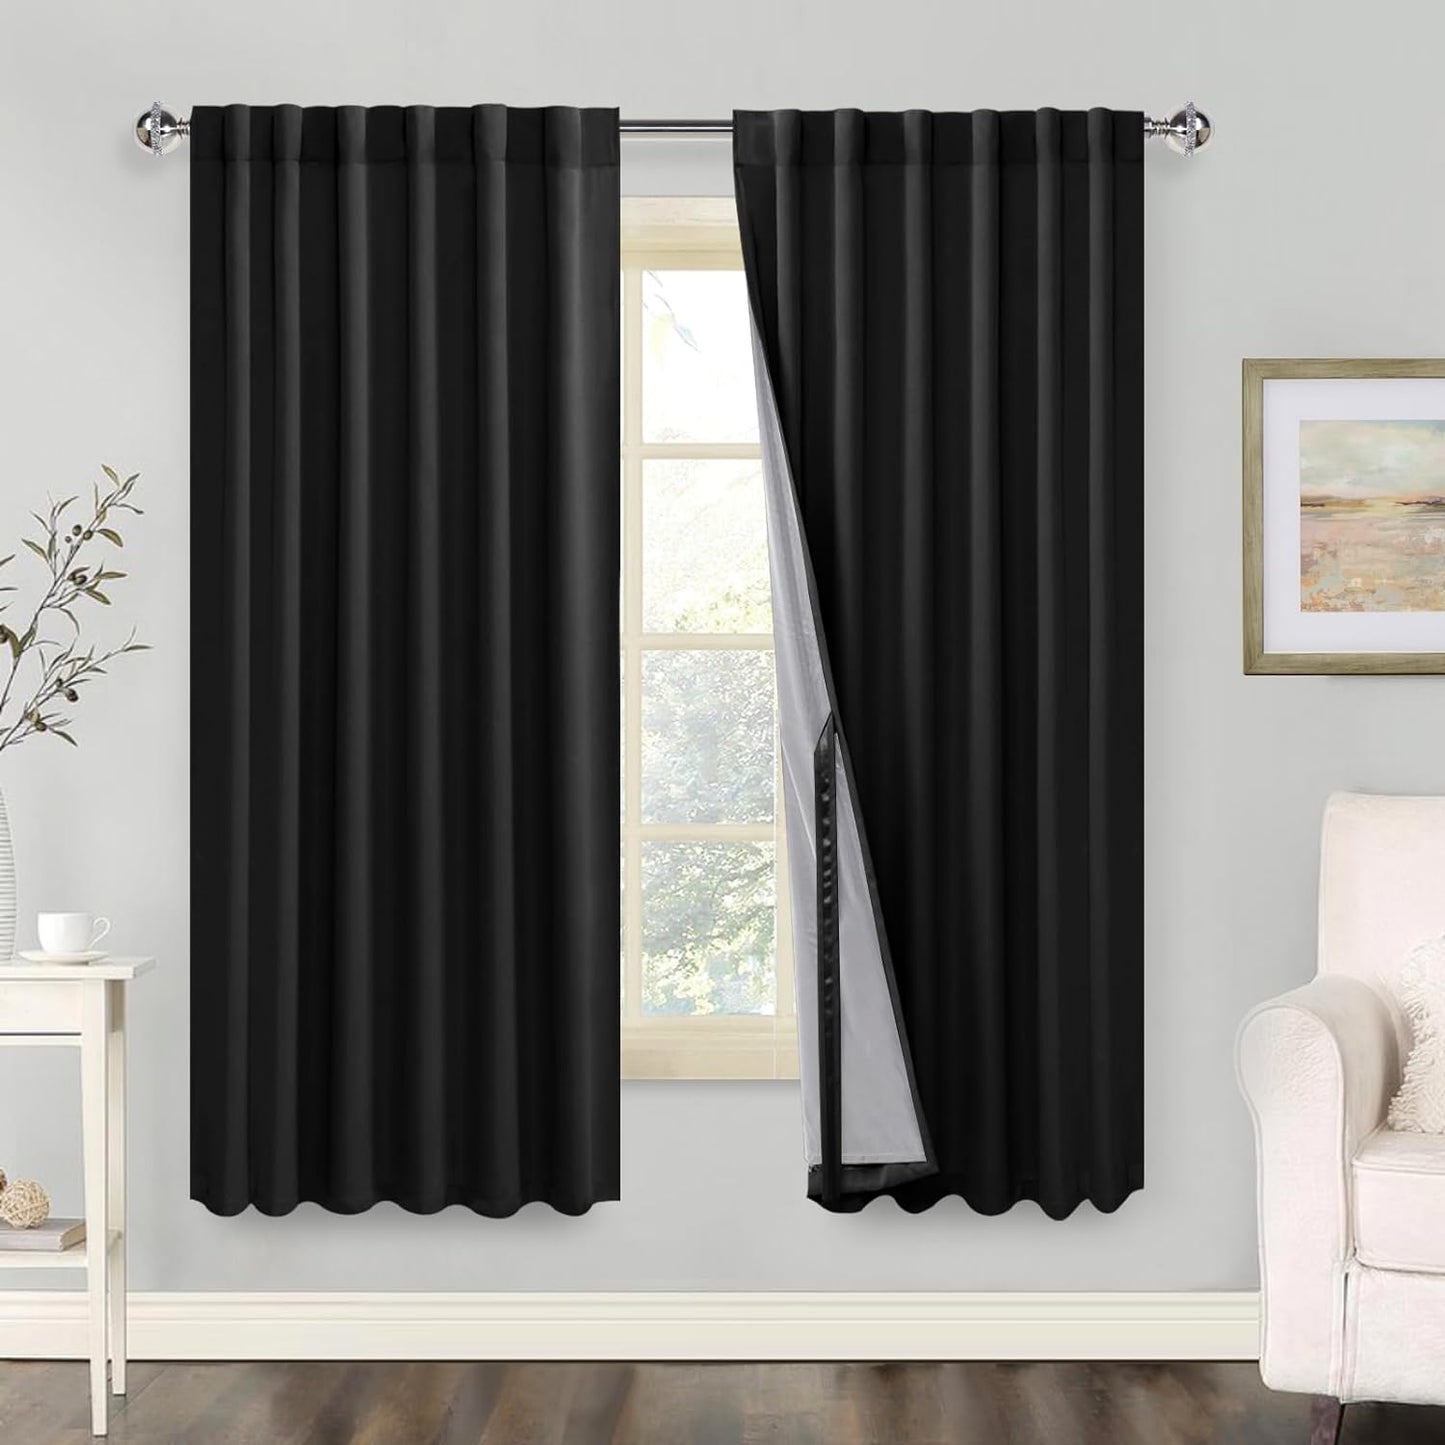 100% Blackout Curtains 2 Panels with Tiebacks- Heat and Full Light Blocking Window Treatment with Black Liner for Bedroom/Nursery, Rod Pocket & Back Tab，White, W52 X L84 Inches Long, Set of 2  XWZO Black W52" X L63"|2 Panels 